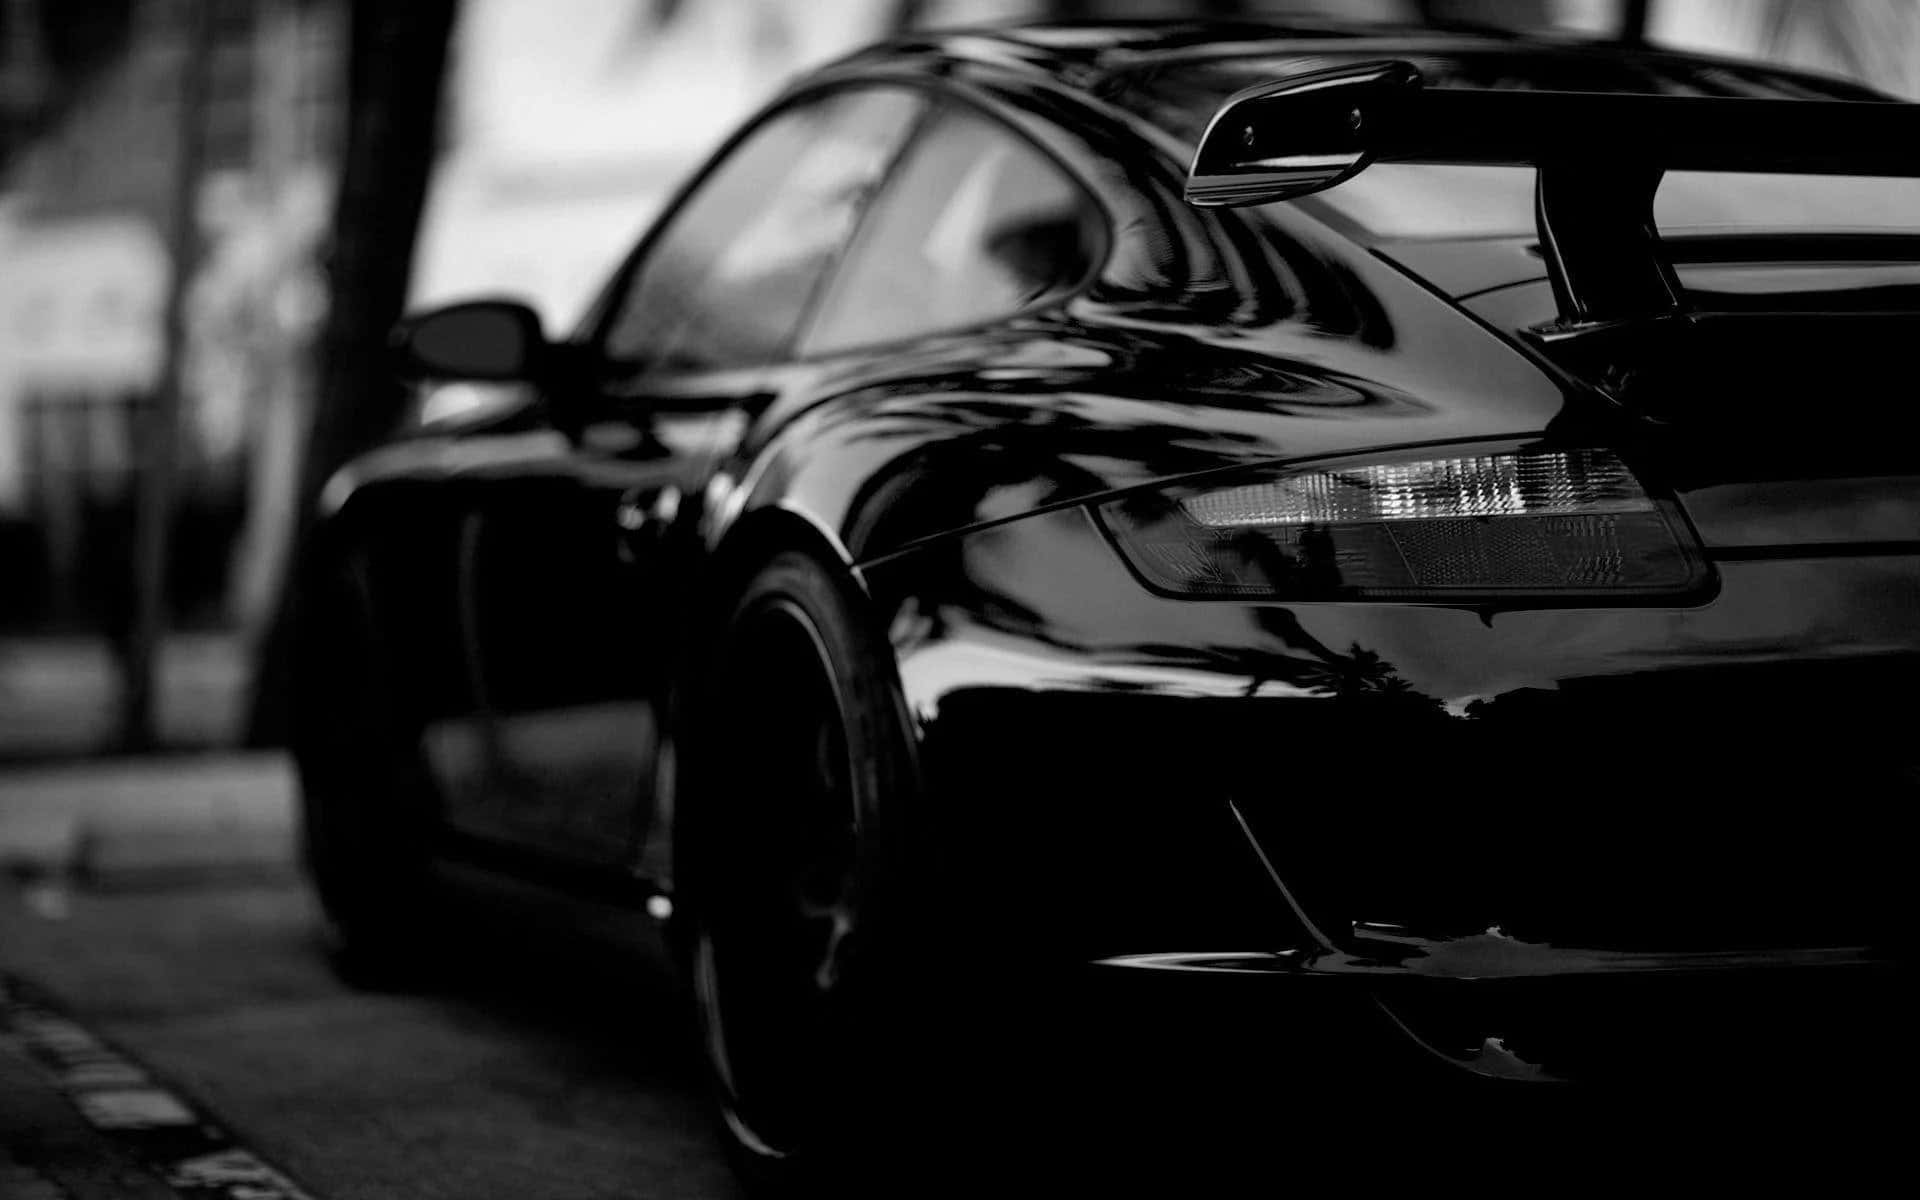 A sleek and shiny black car on the open road.